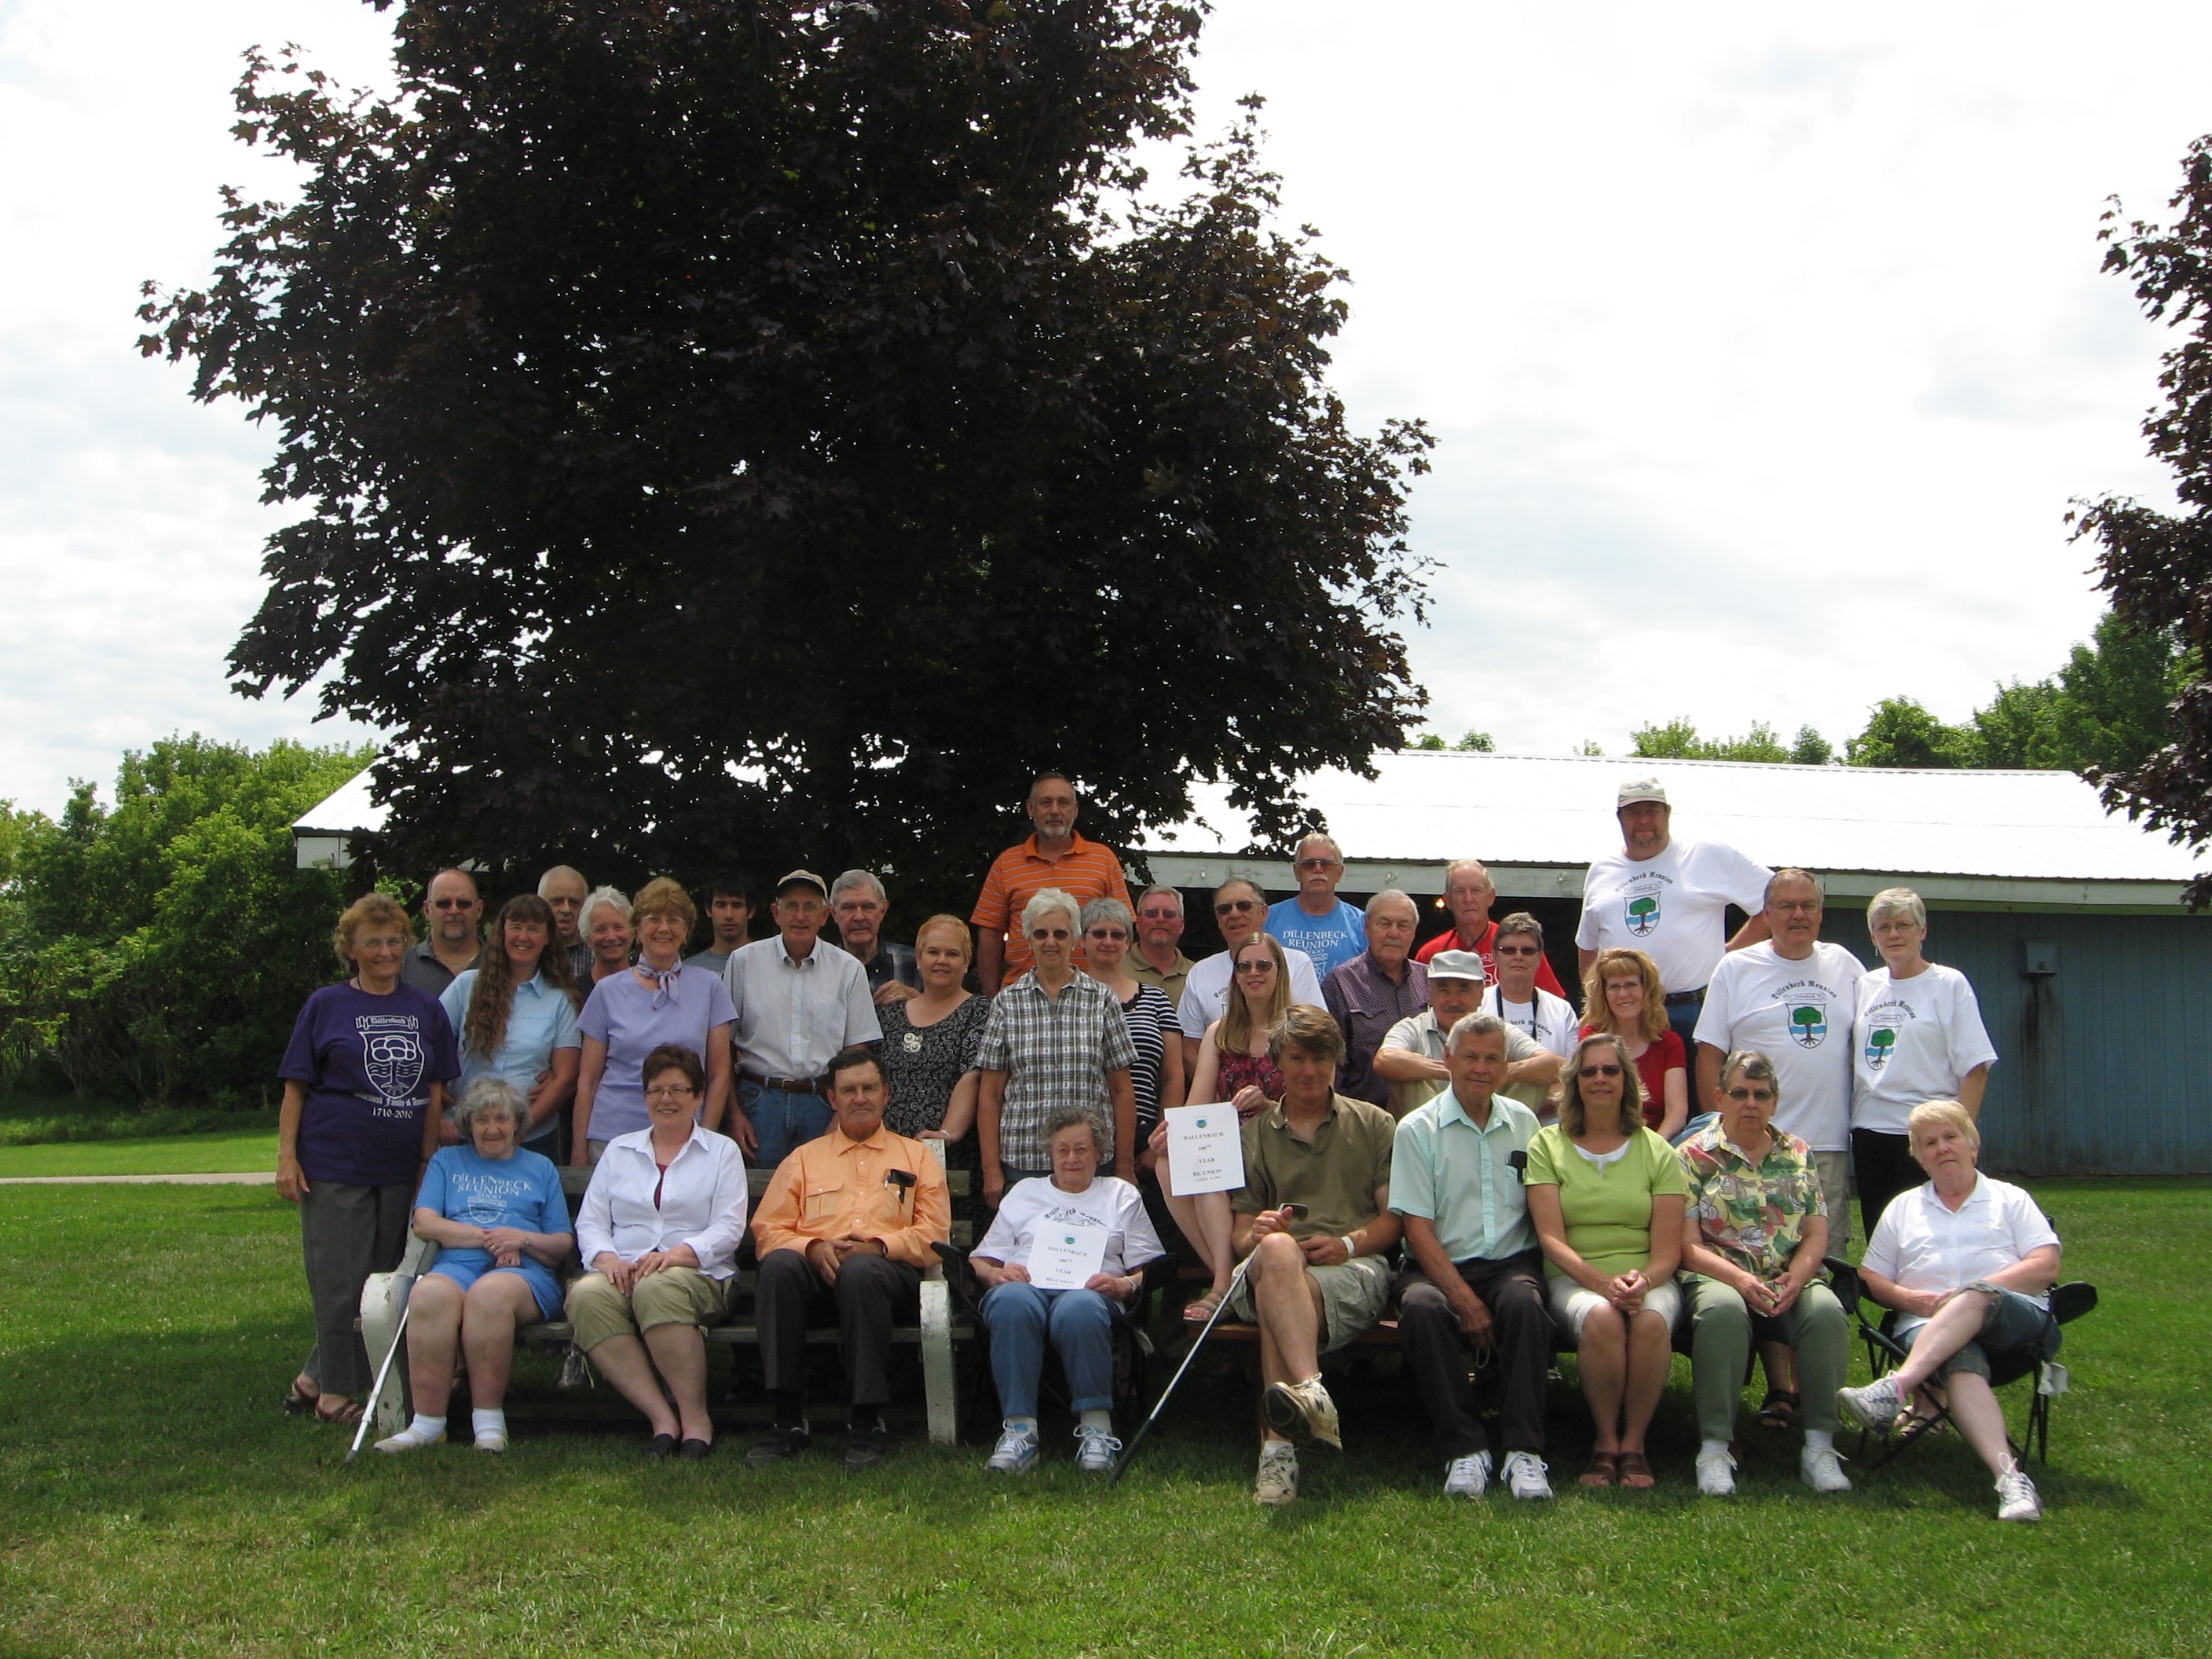 The 110th Dillenbeck Family Reunion